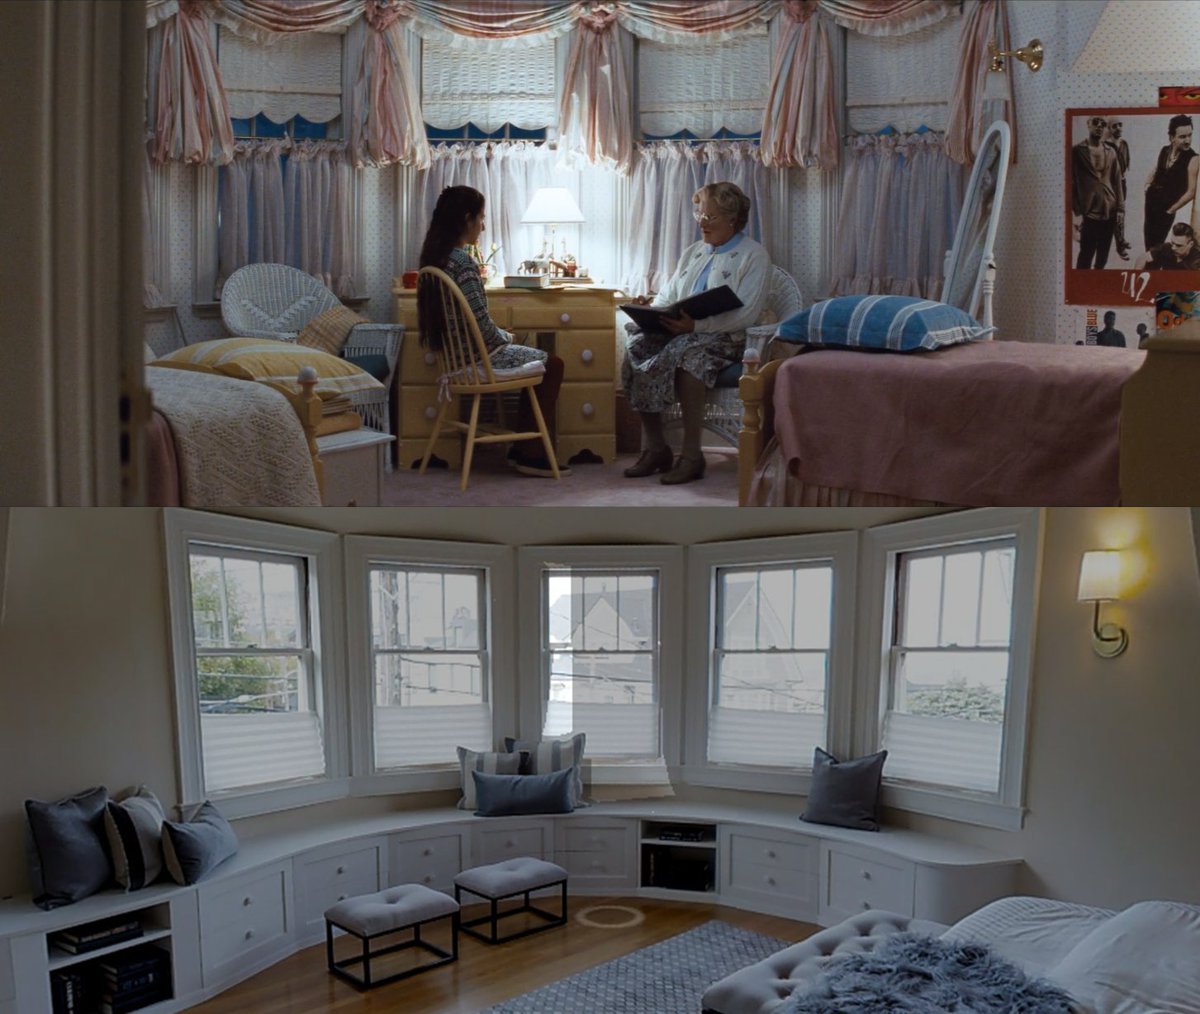 This is the kids' room, but looks to be the master bedroom today. Either production crew changed things up for filming, or renovations switched things up.